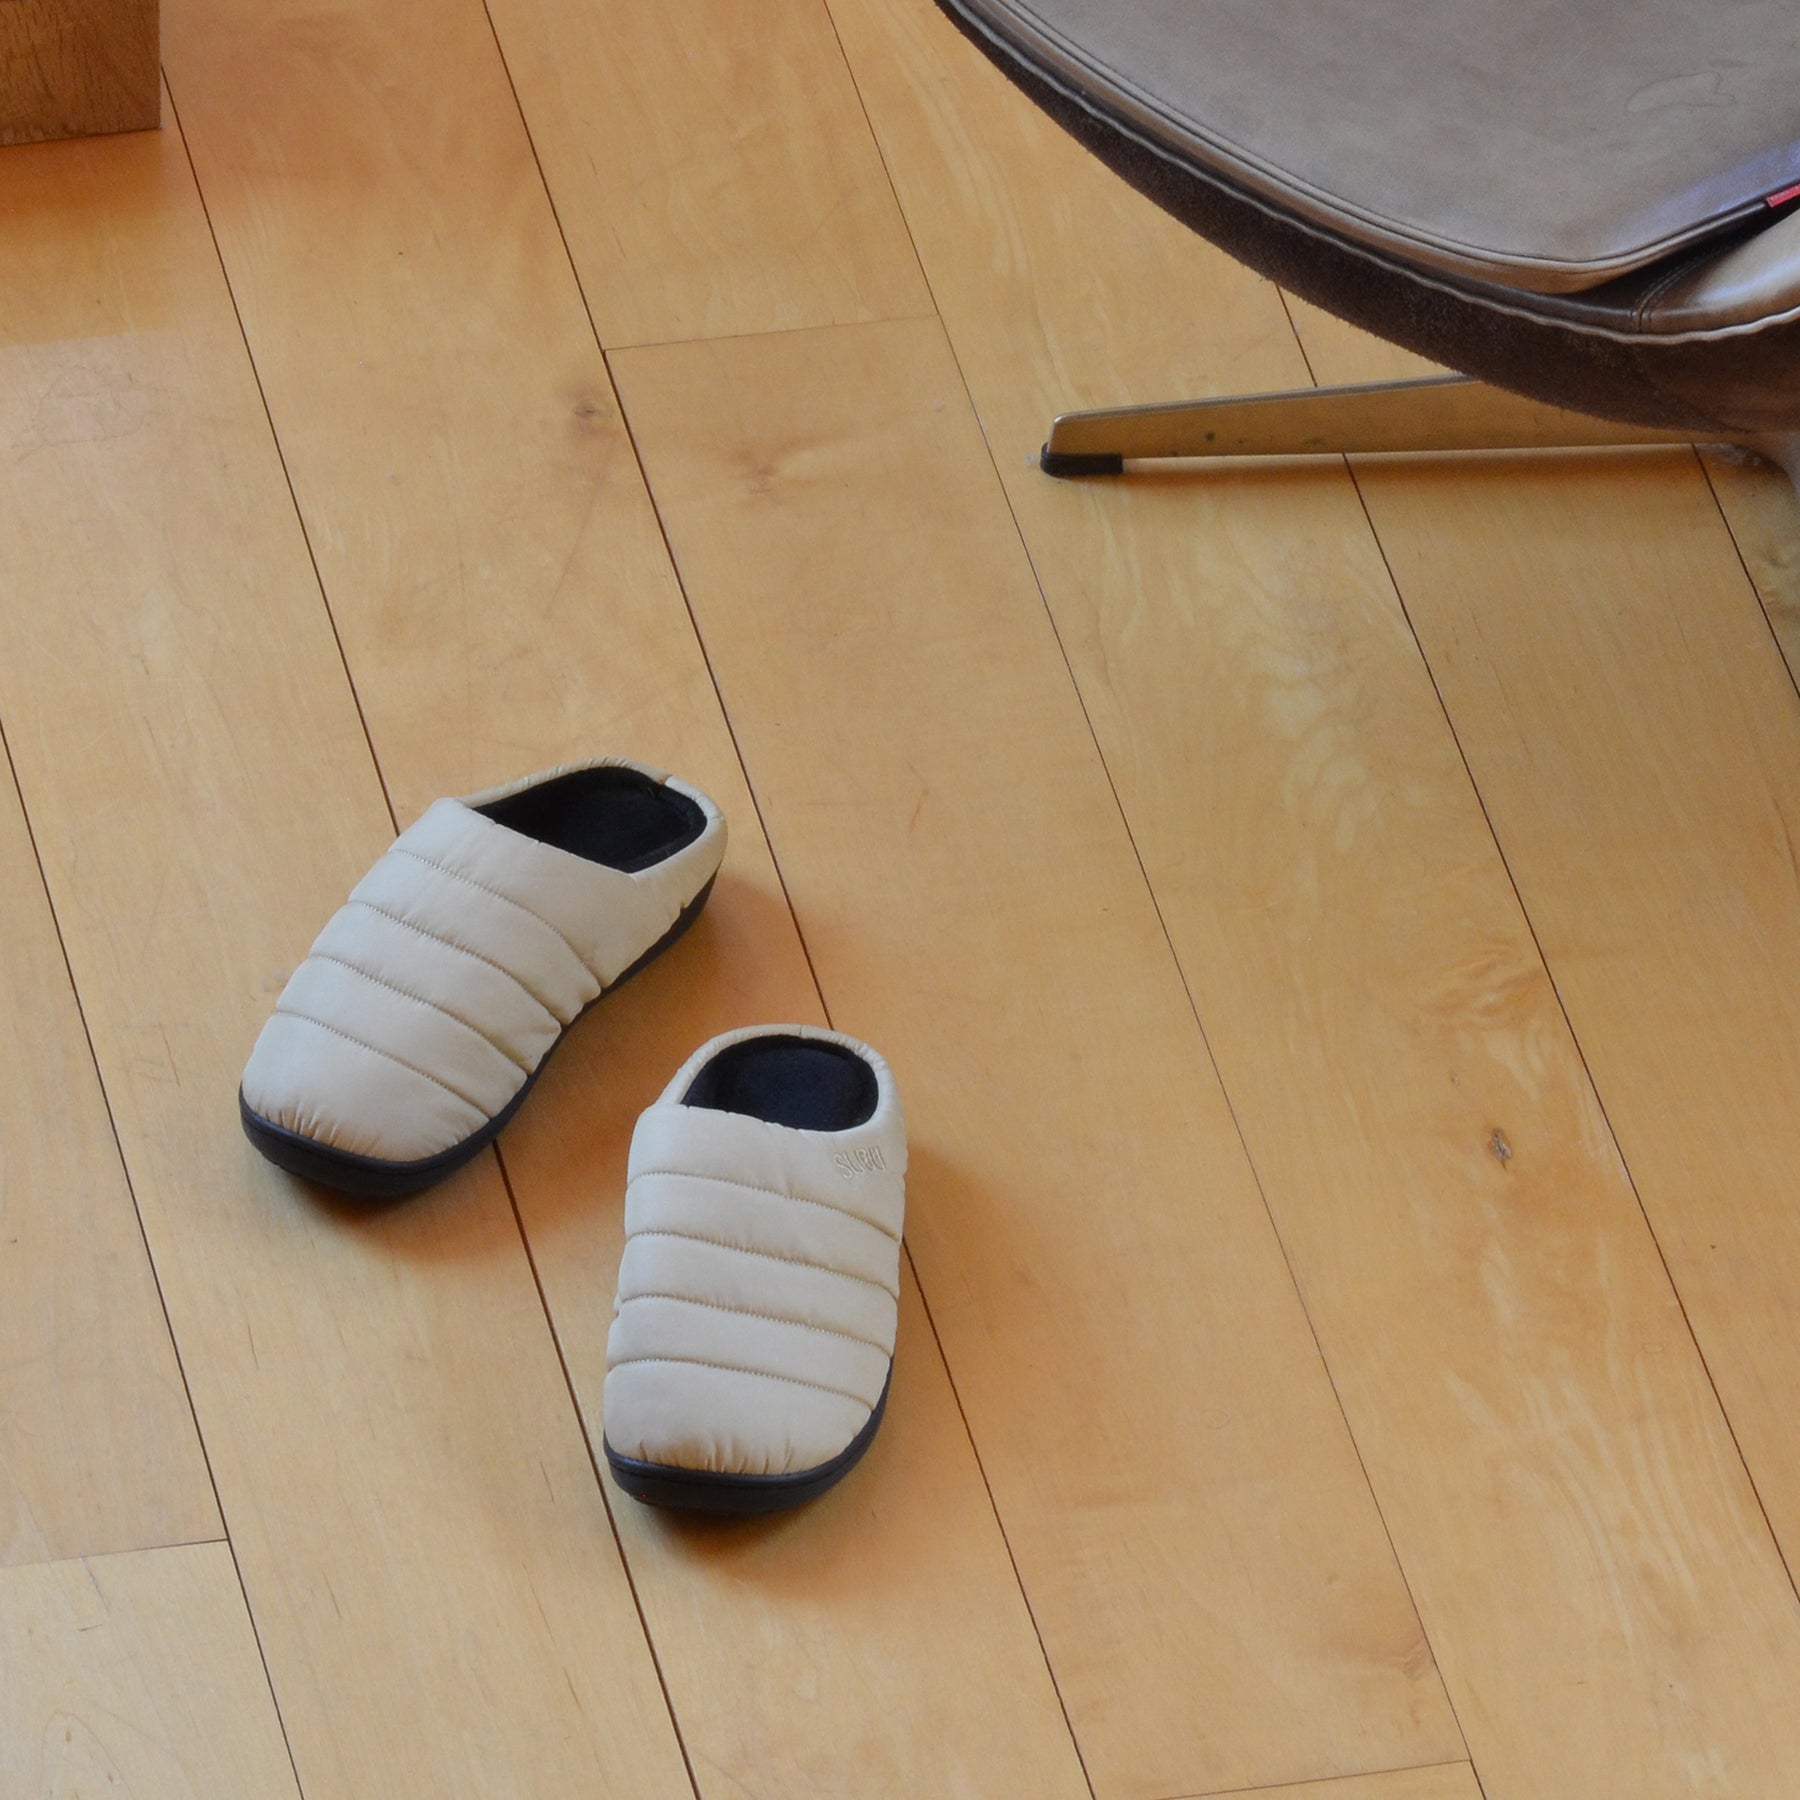 Subu Slippers, SUBU, outdoor slippers, Japanese Slippers,